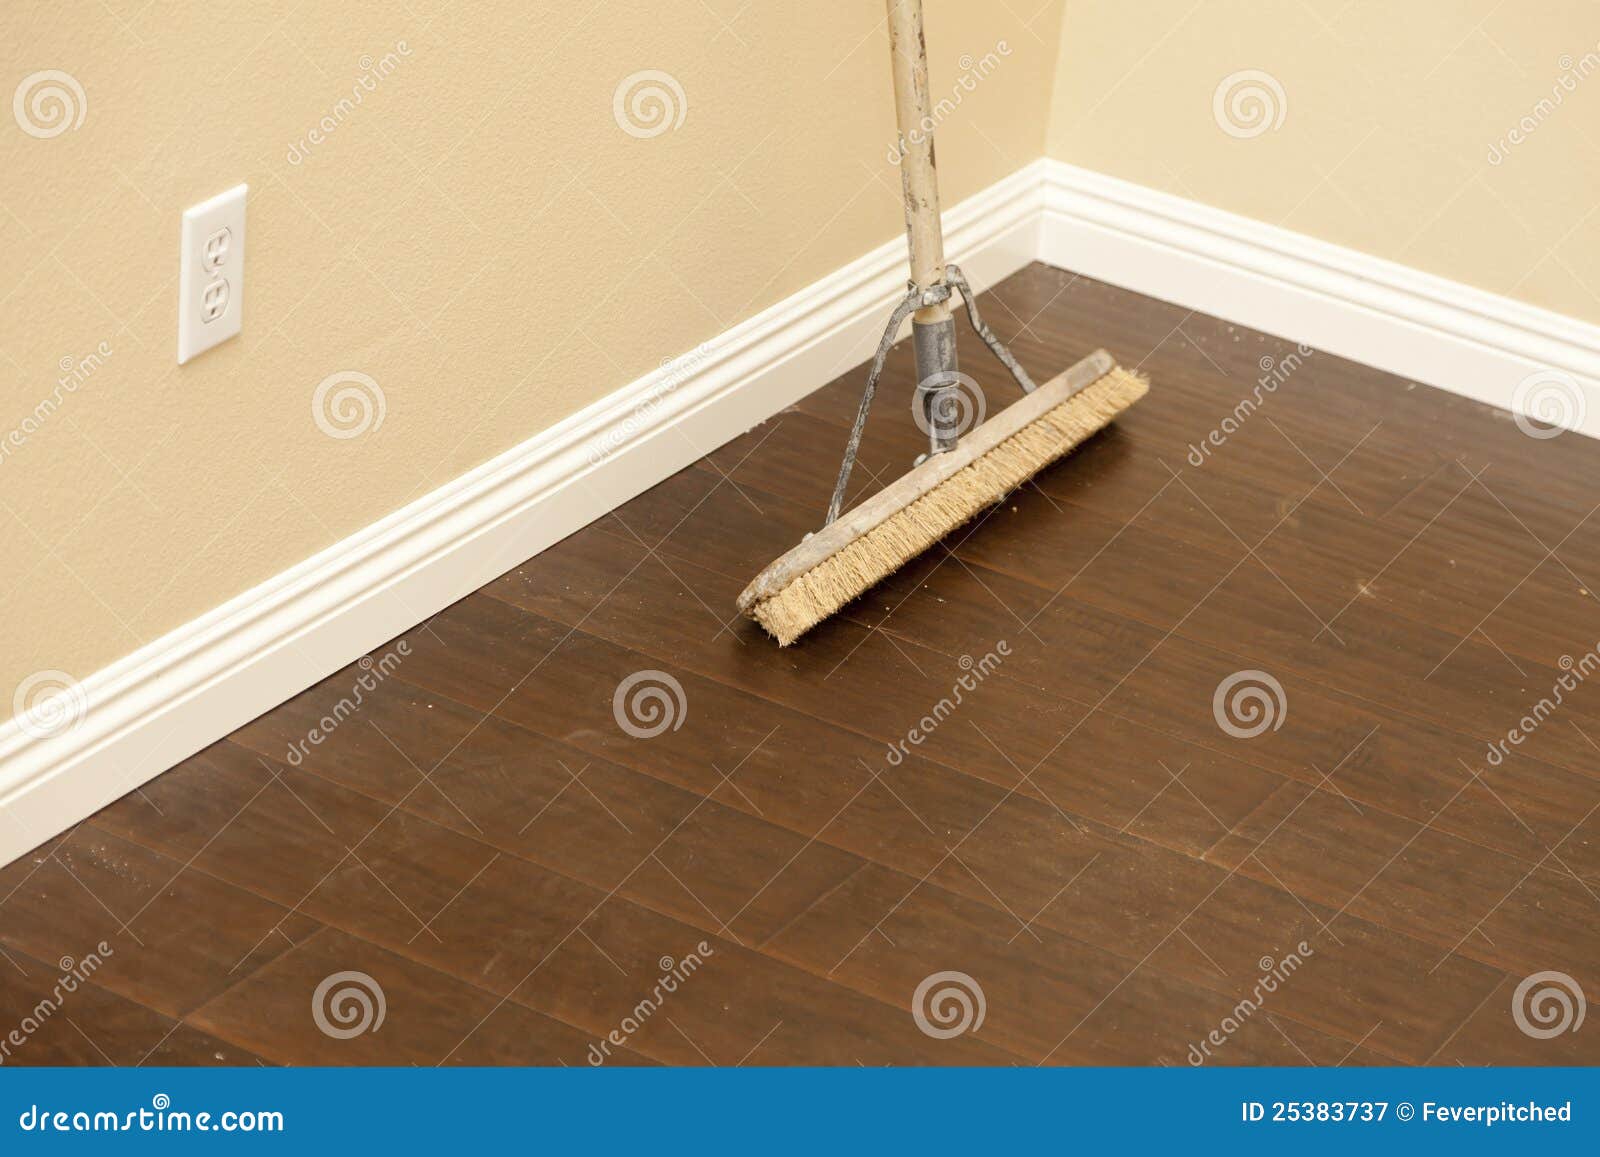 push broom on a newly installed laminate floor and baseboard